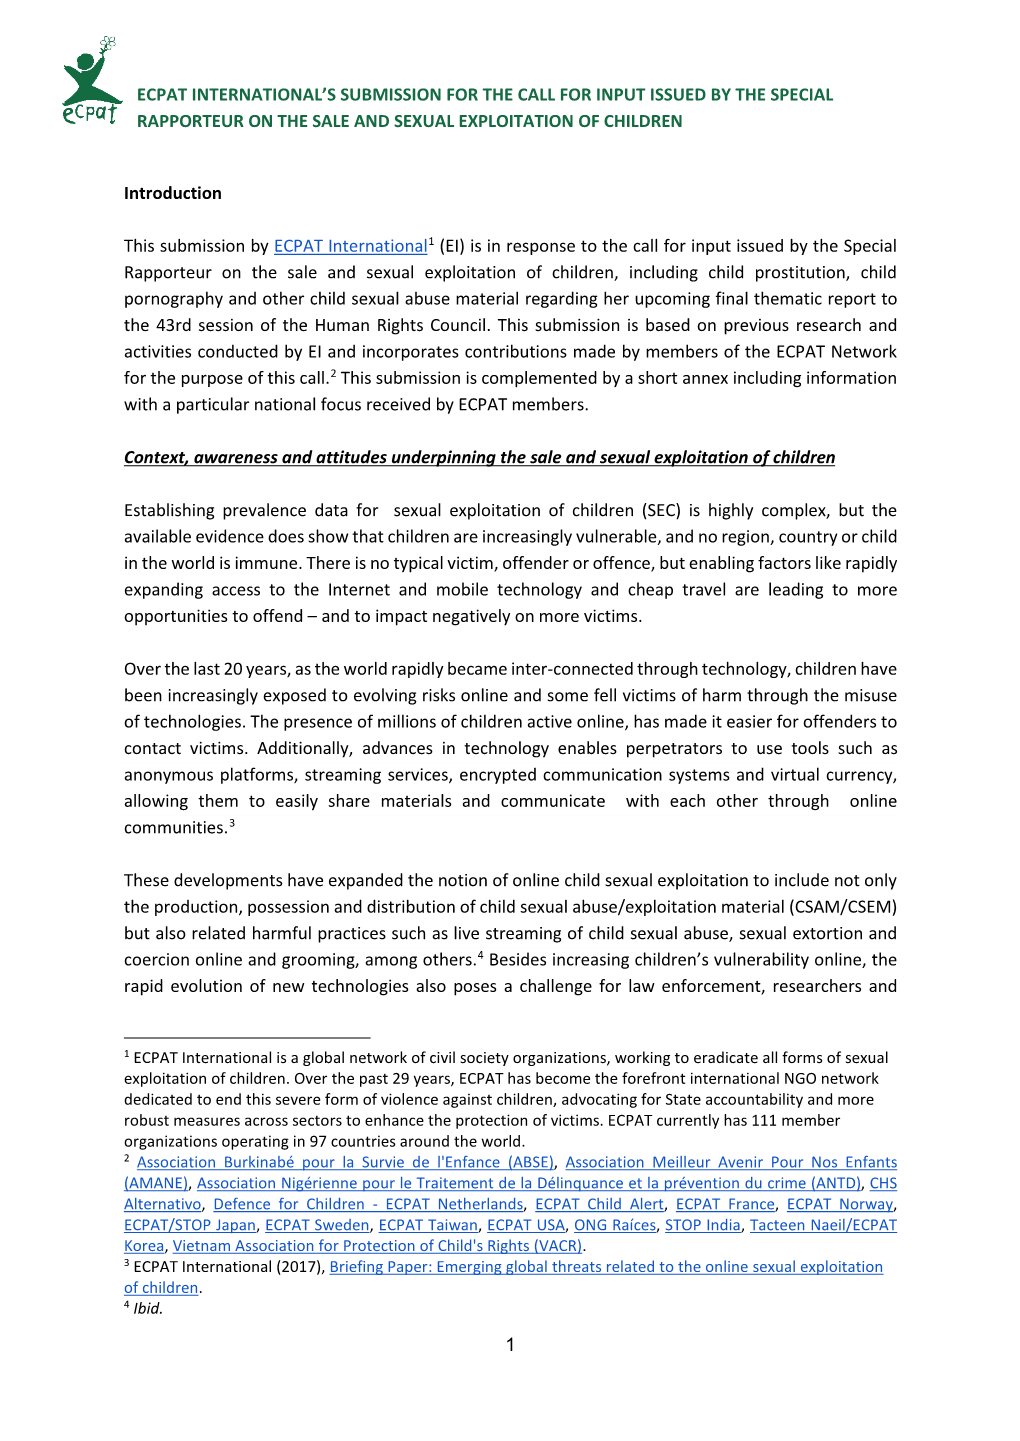 Ecpat International's Submission for the Call for Input Issued by the Special Rapporteur on the Sale and Sexual Exploitation O